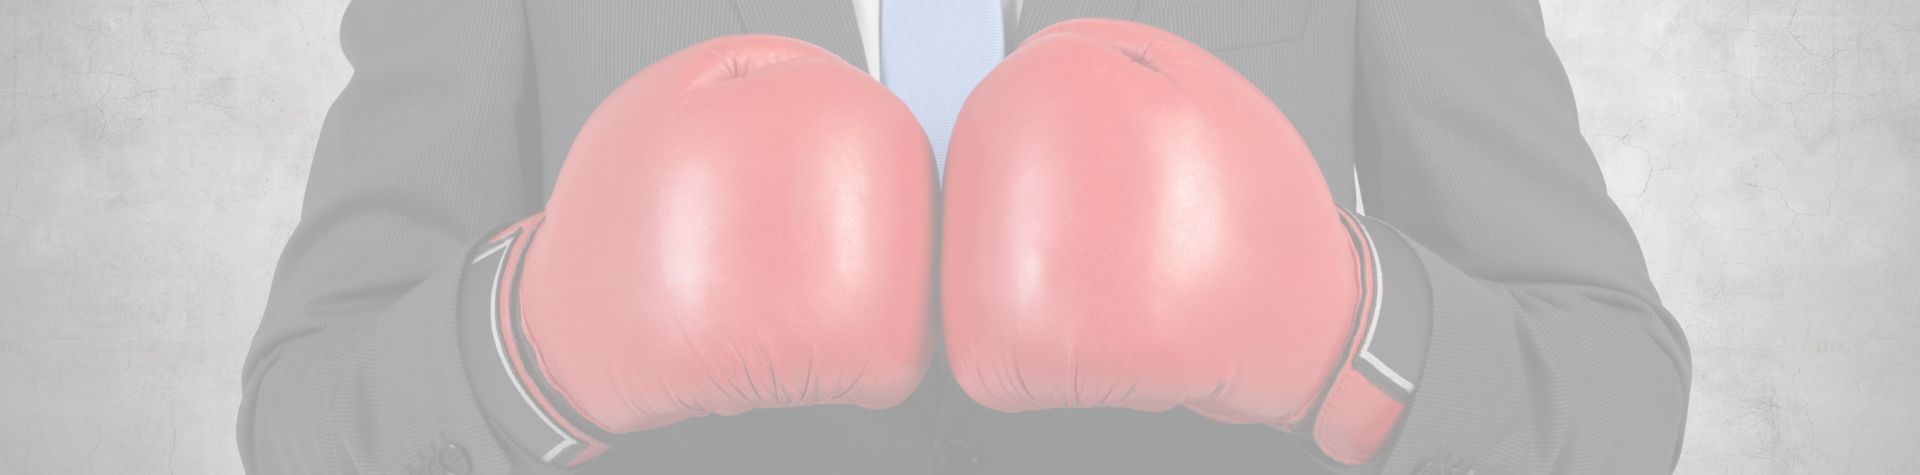 Man in suit wearing boxing gloves